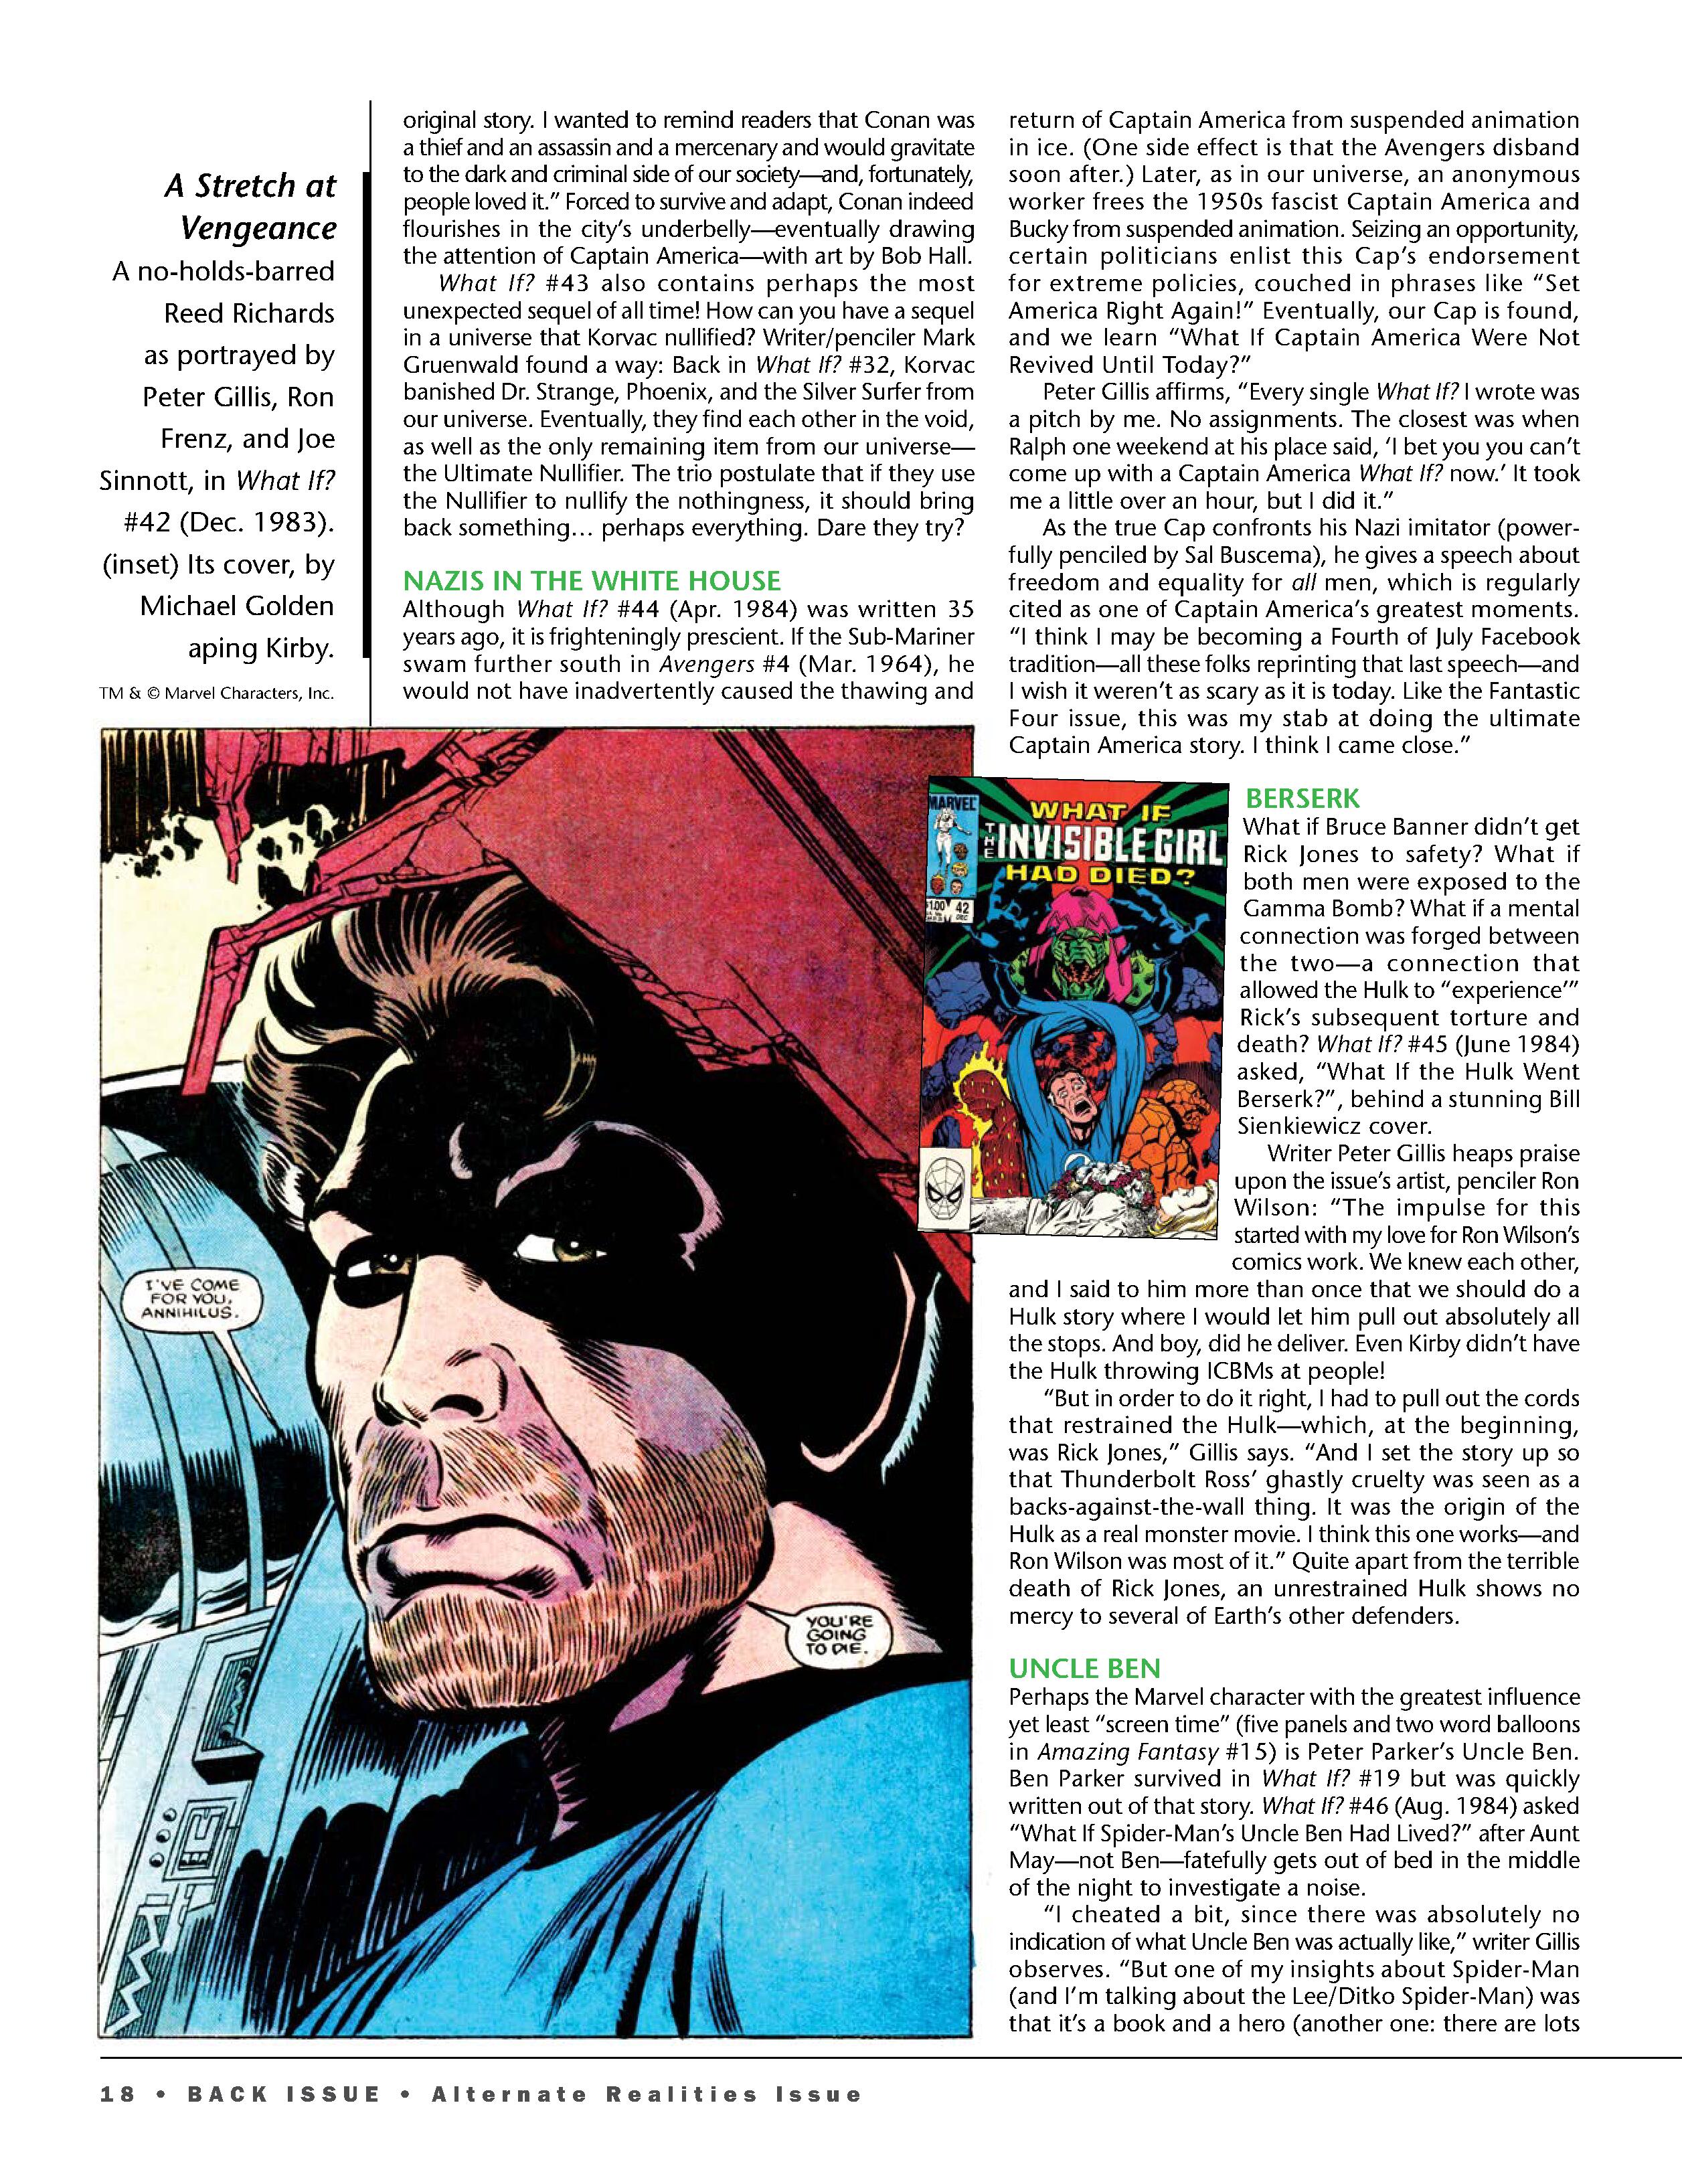 Read online Back Issue comic -  Issue #111 - 20